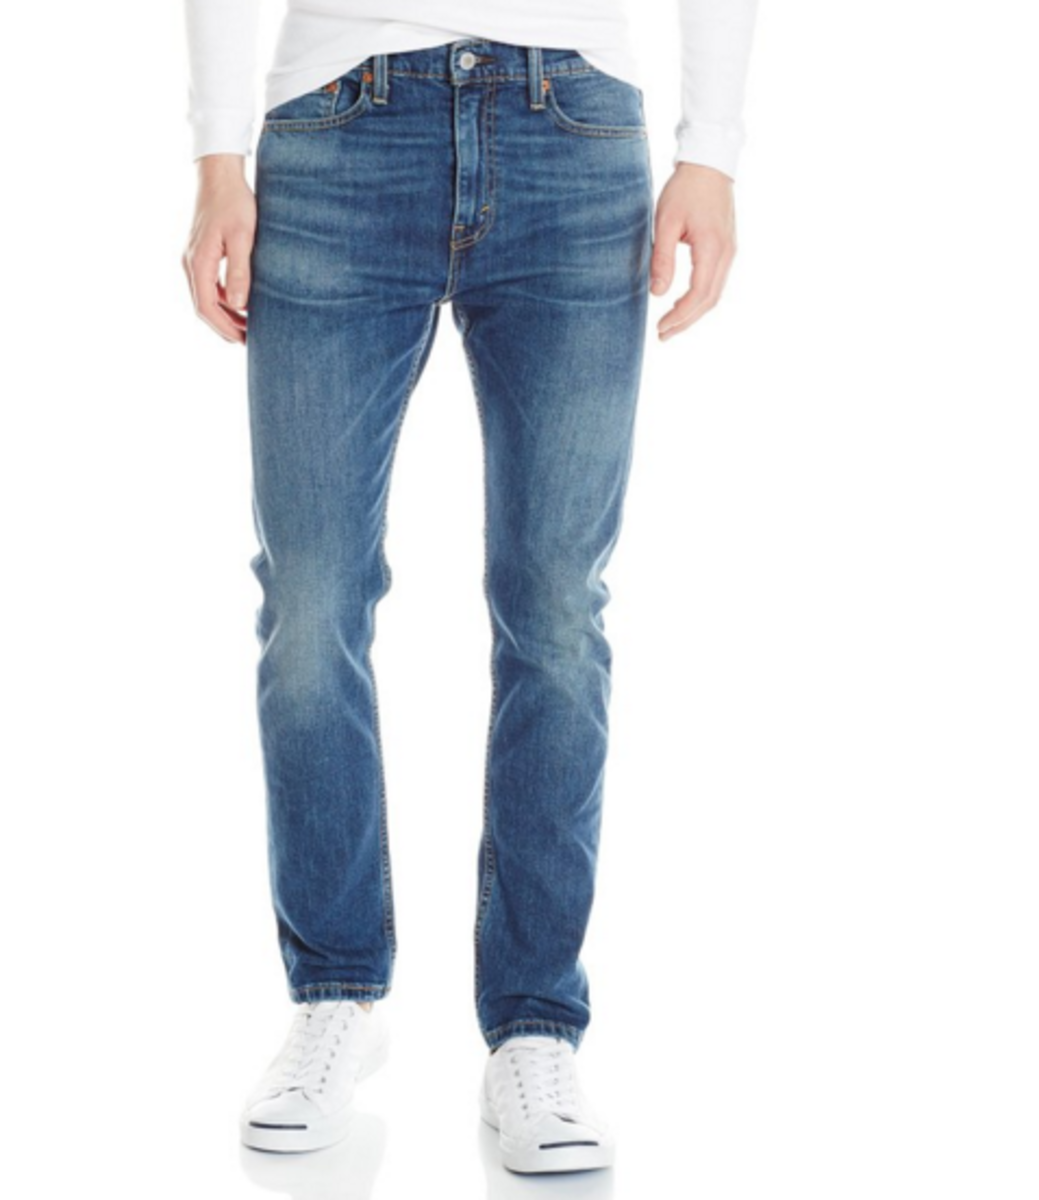 Men's Levi's Jeans, Ultimate Buying Guide, Fit, Colors, Materials & More